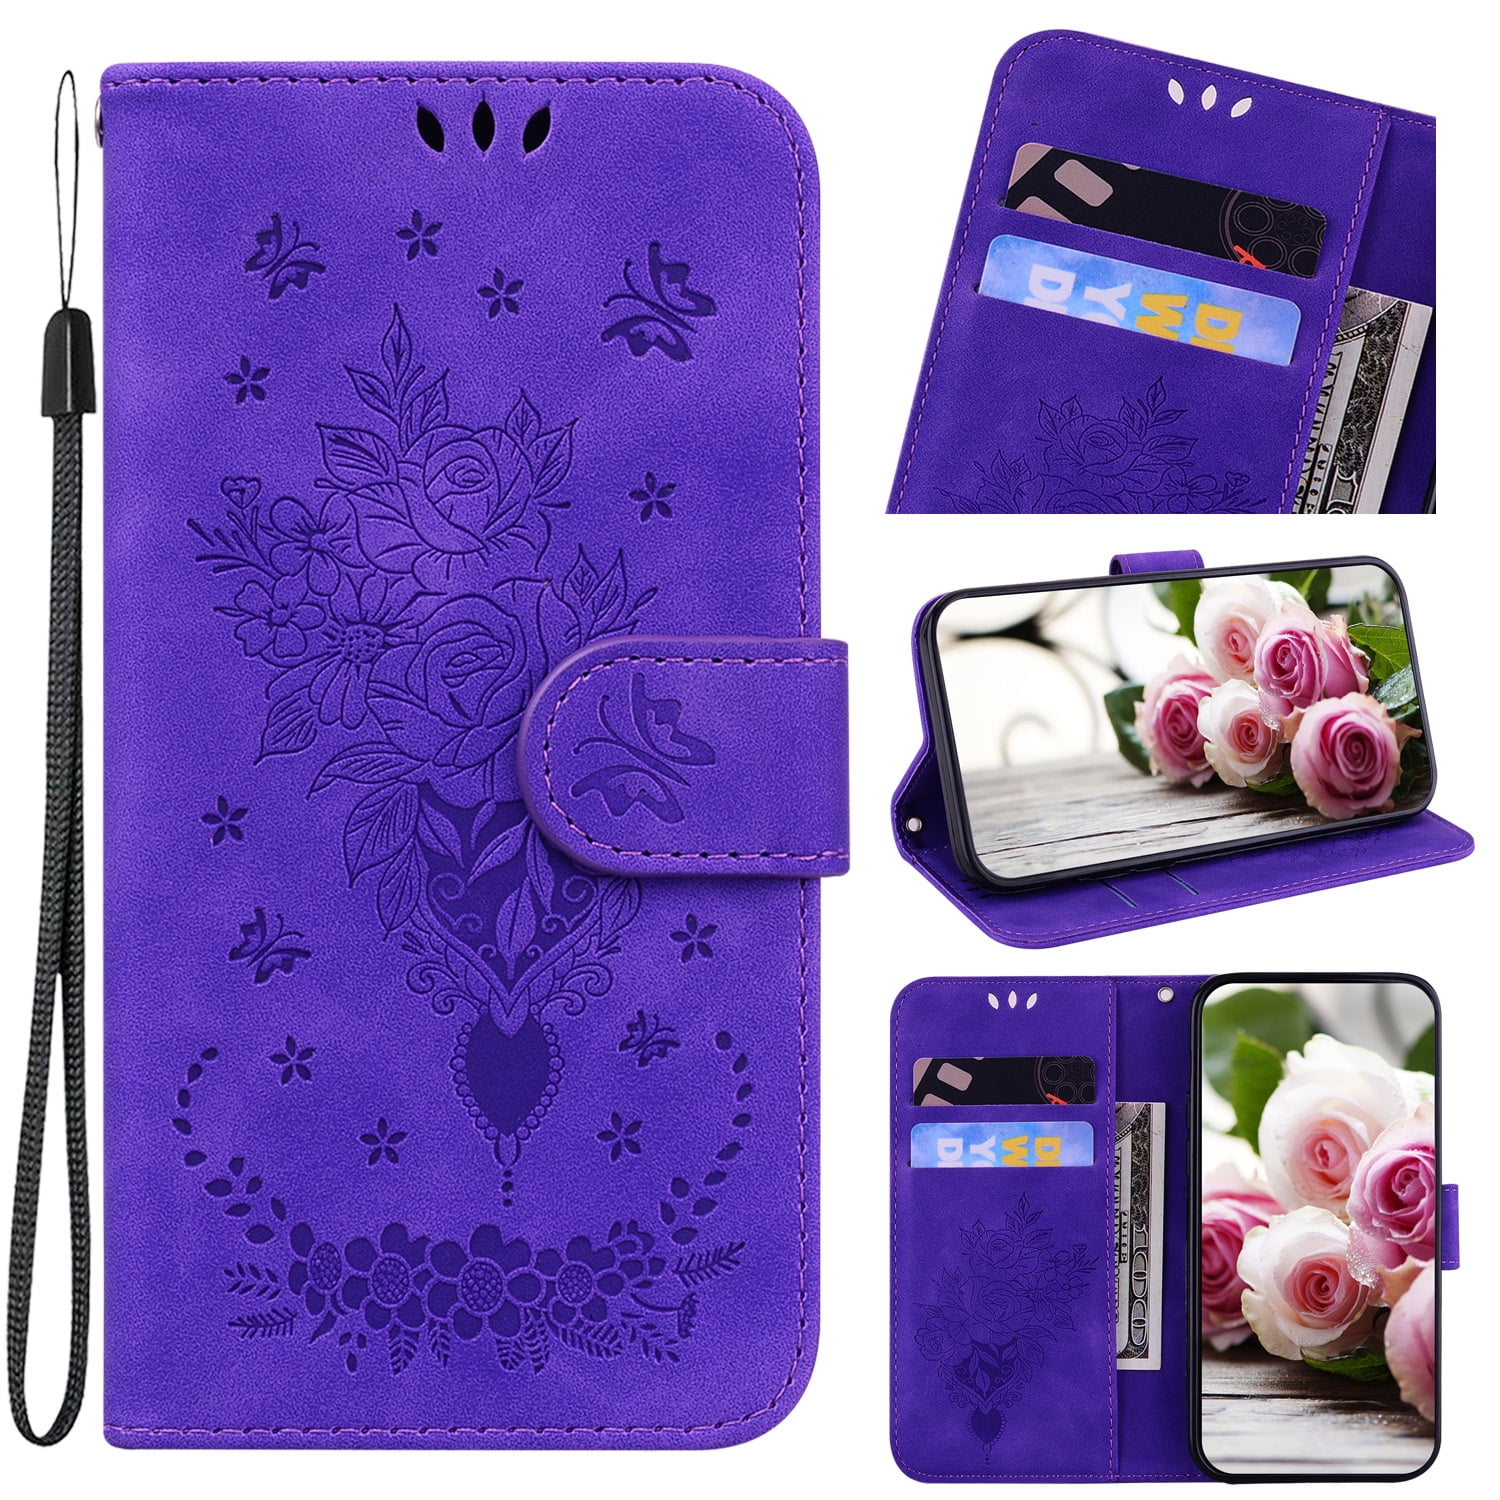 Women's Designer Wallets, Card Holders and Phone Cases